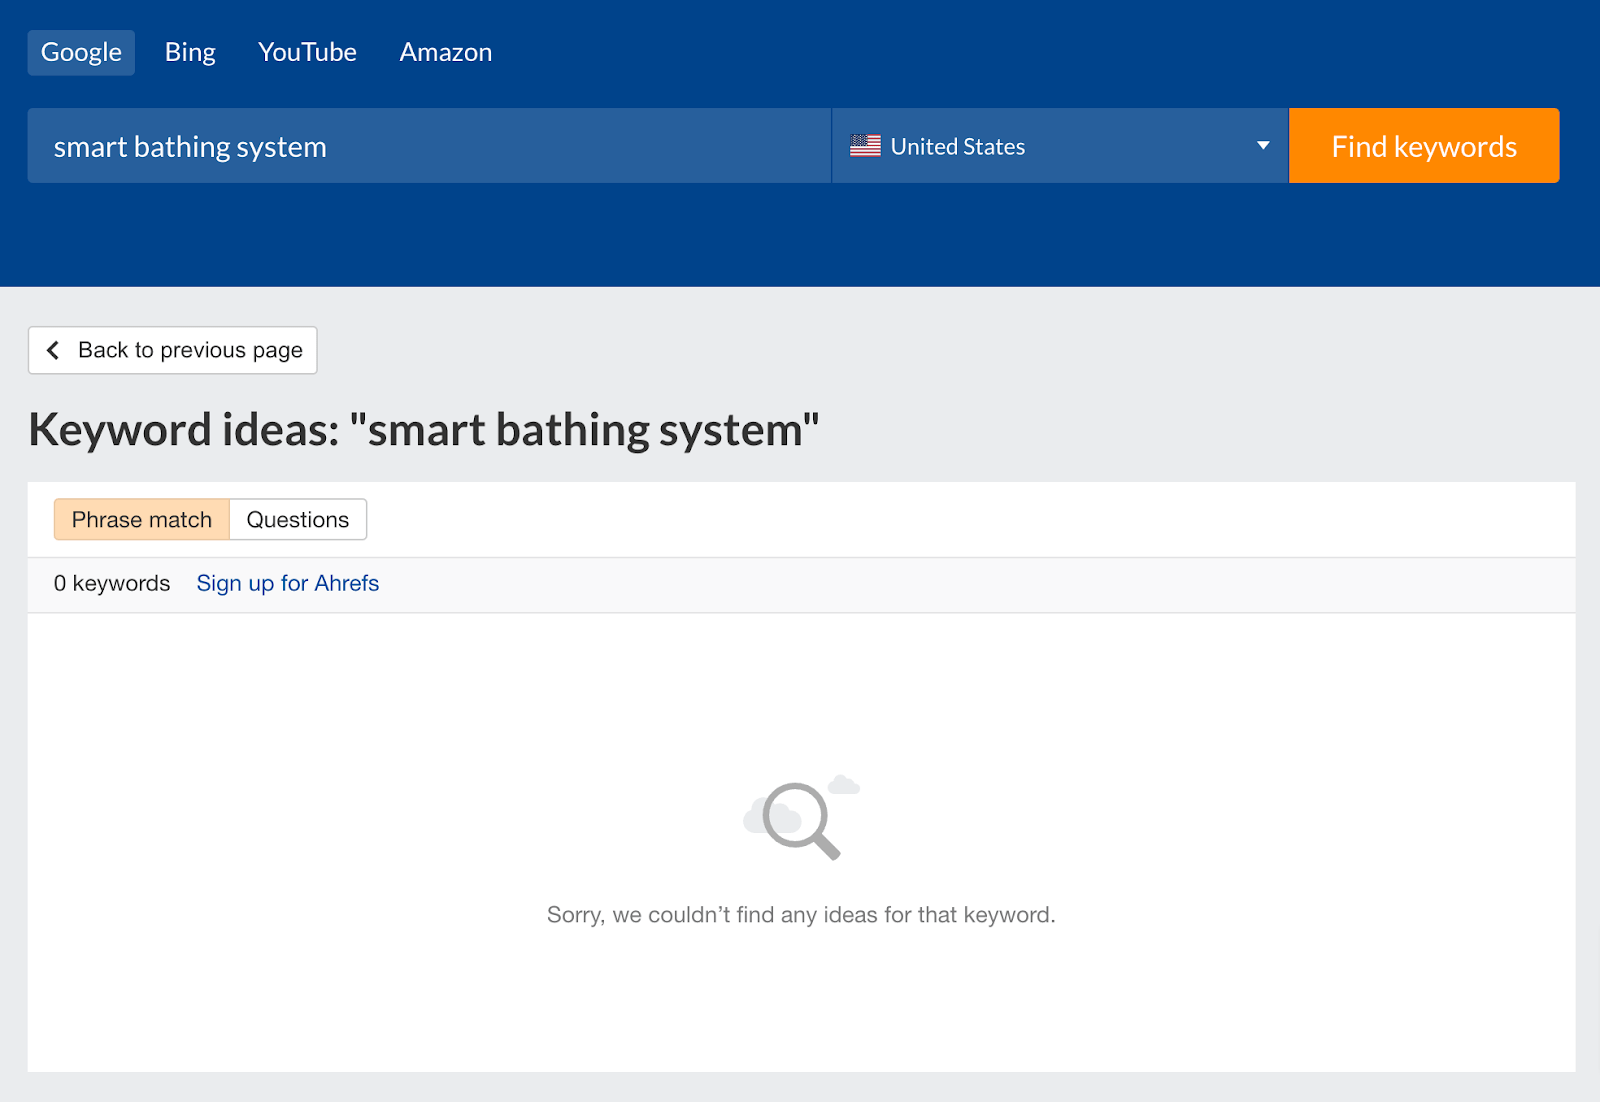 Search for "smart bathing system" in Ahrefs' free keyword generator turns up no results